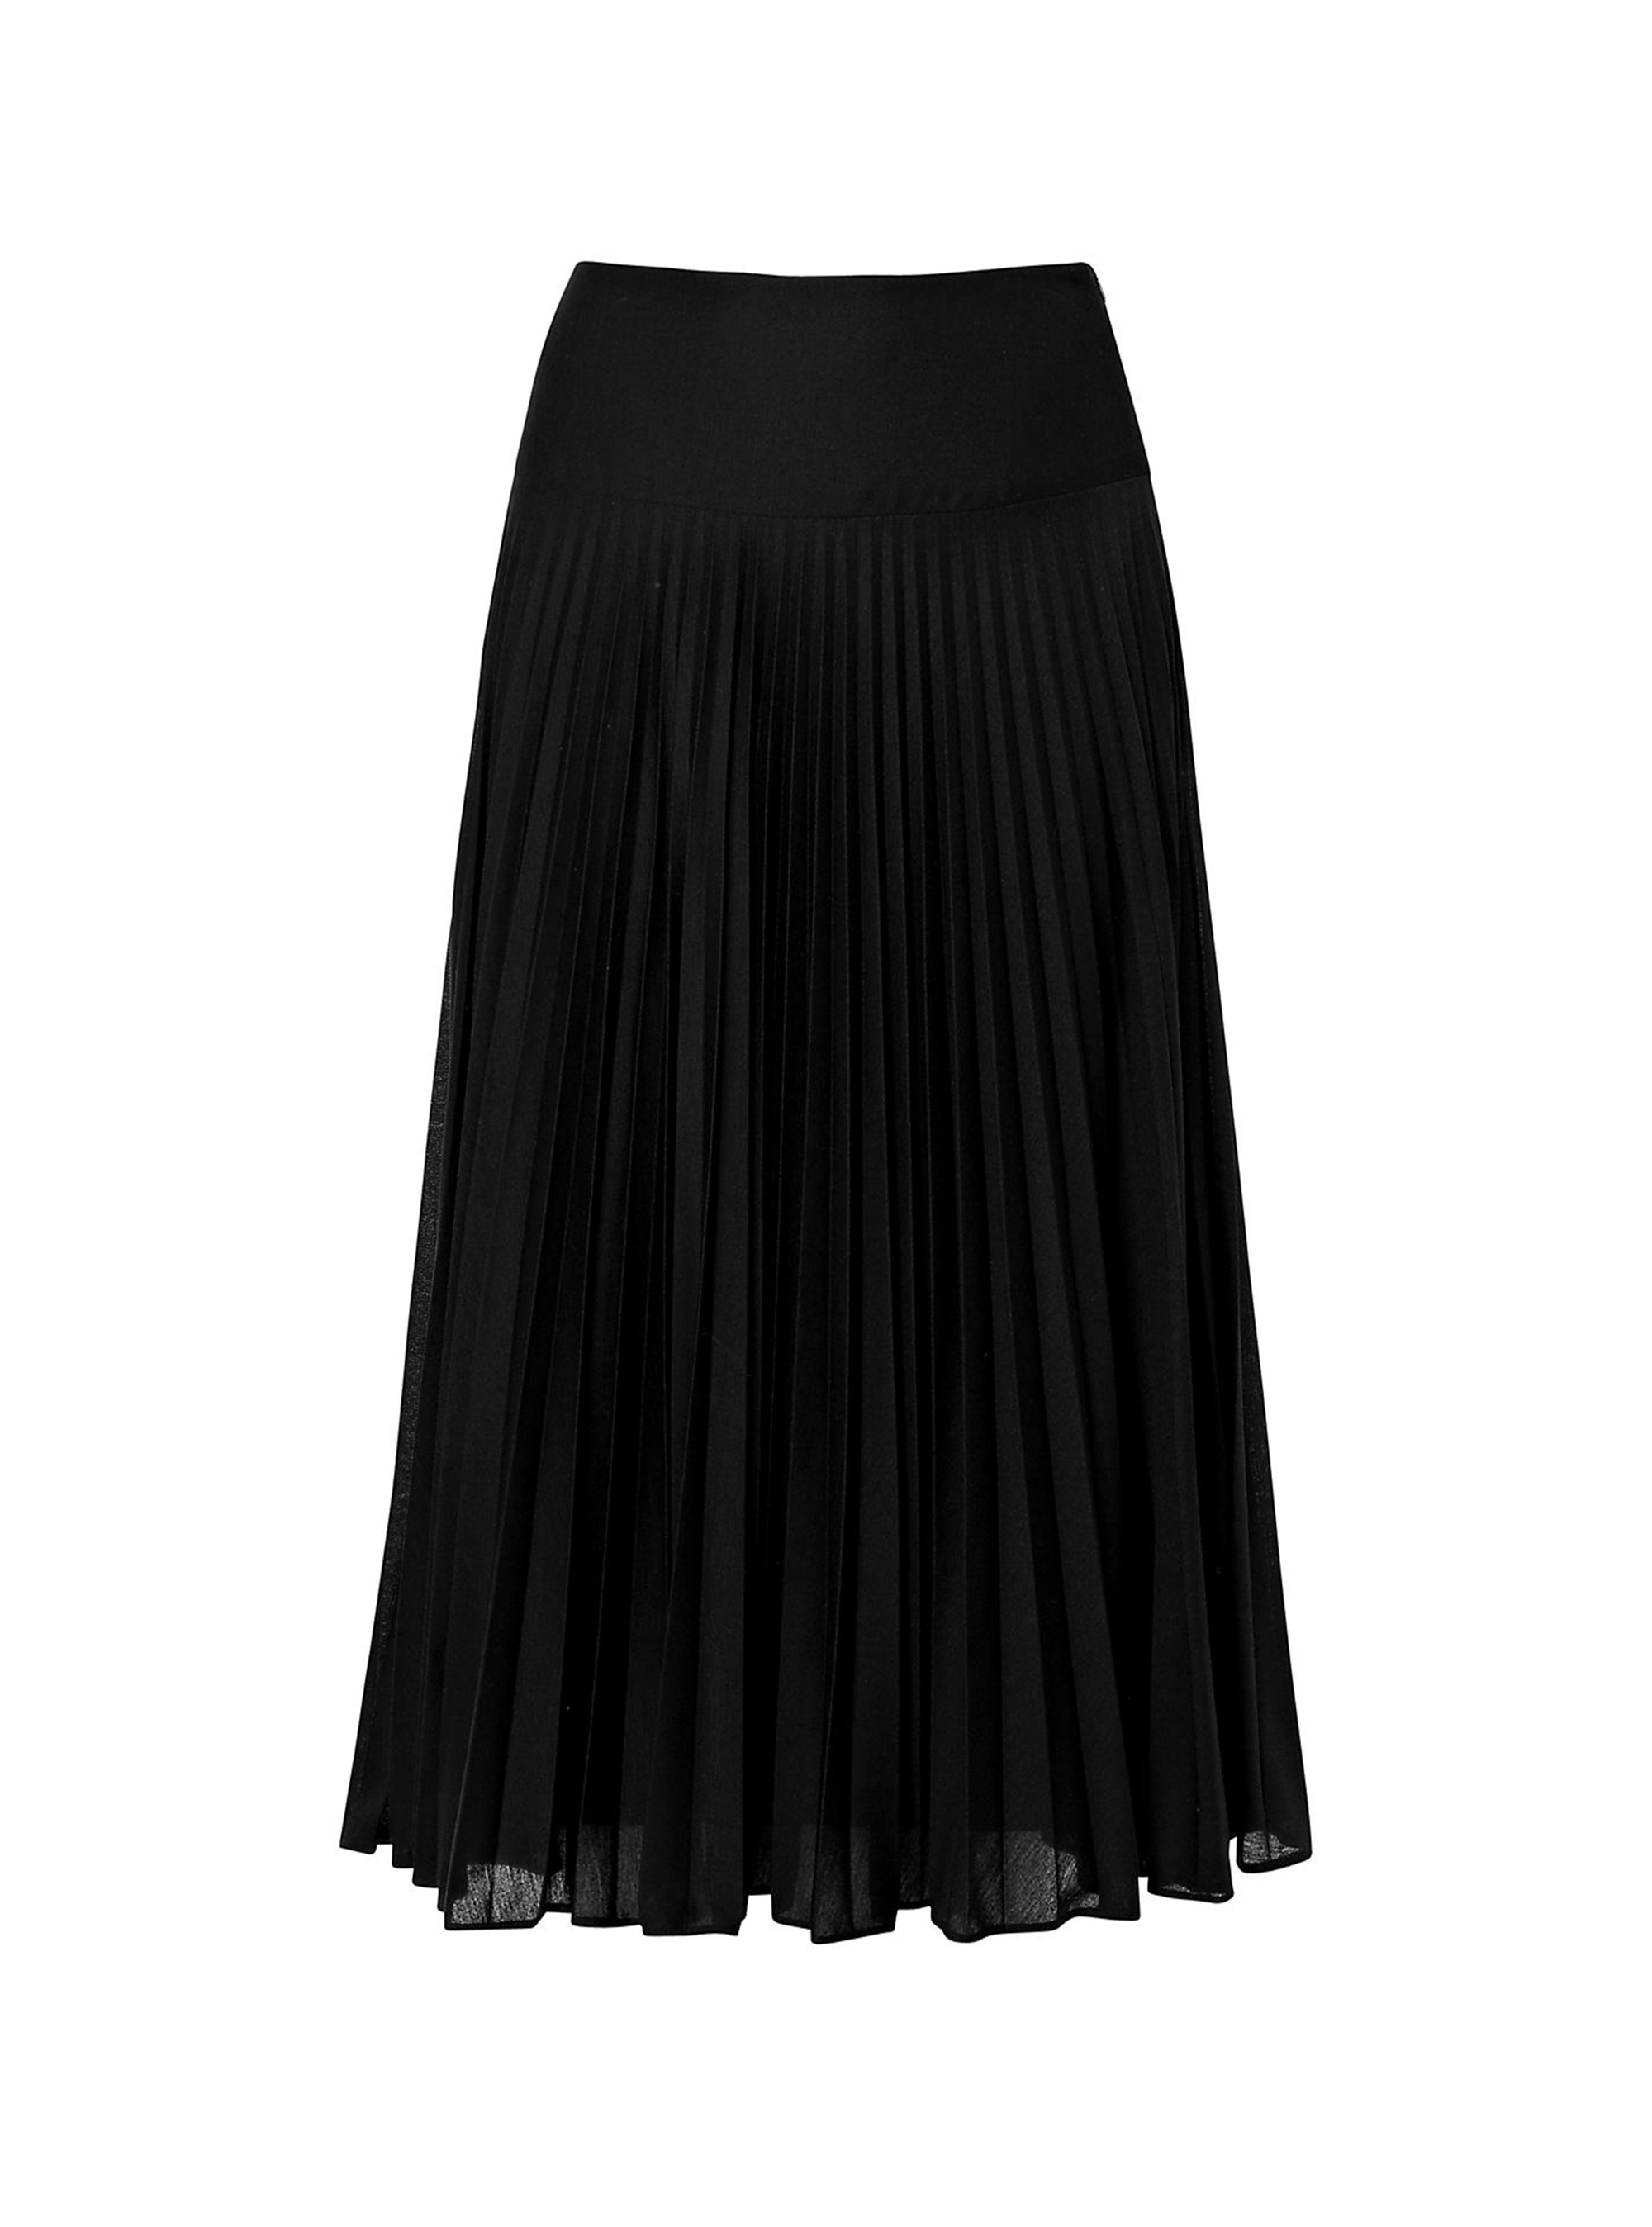 midi skirt - Phase Eight, £65 - Woman And Home